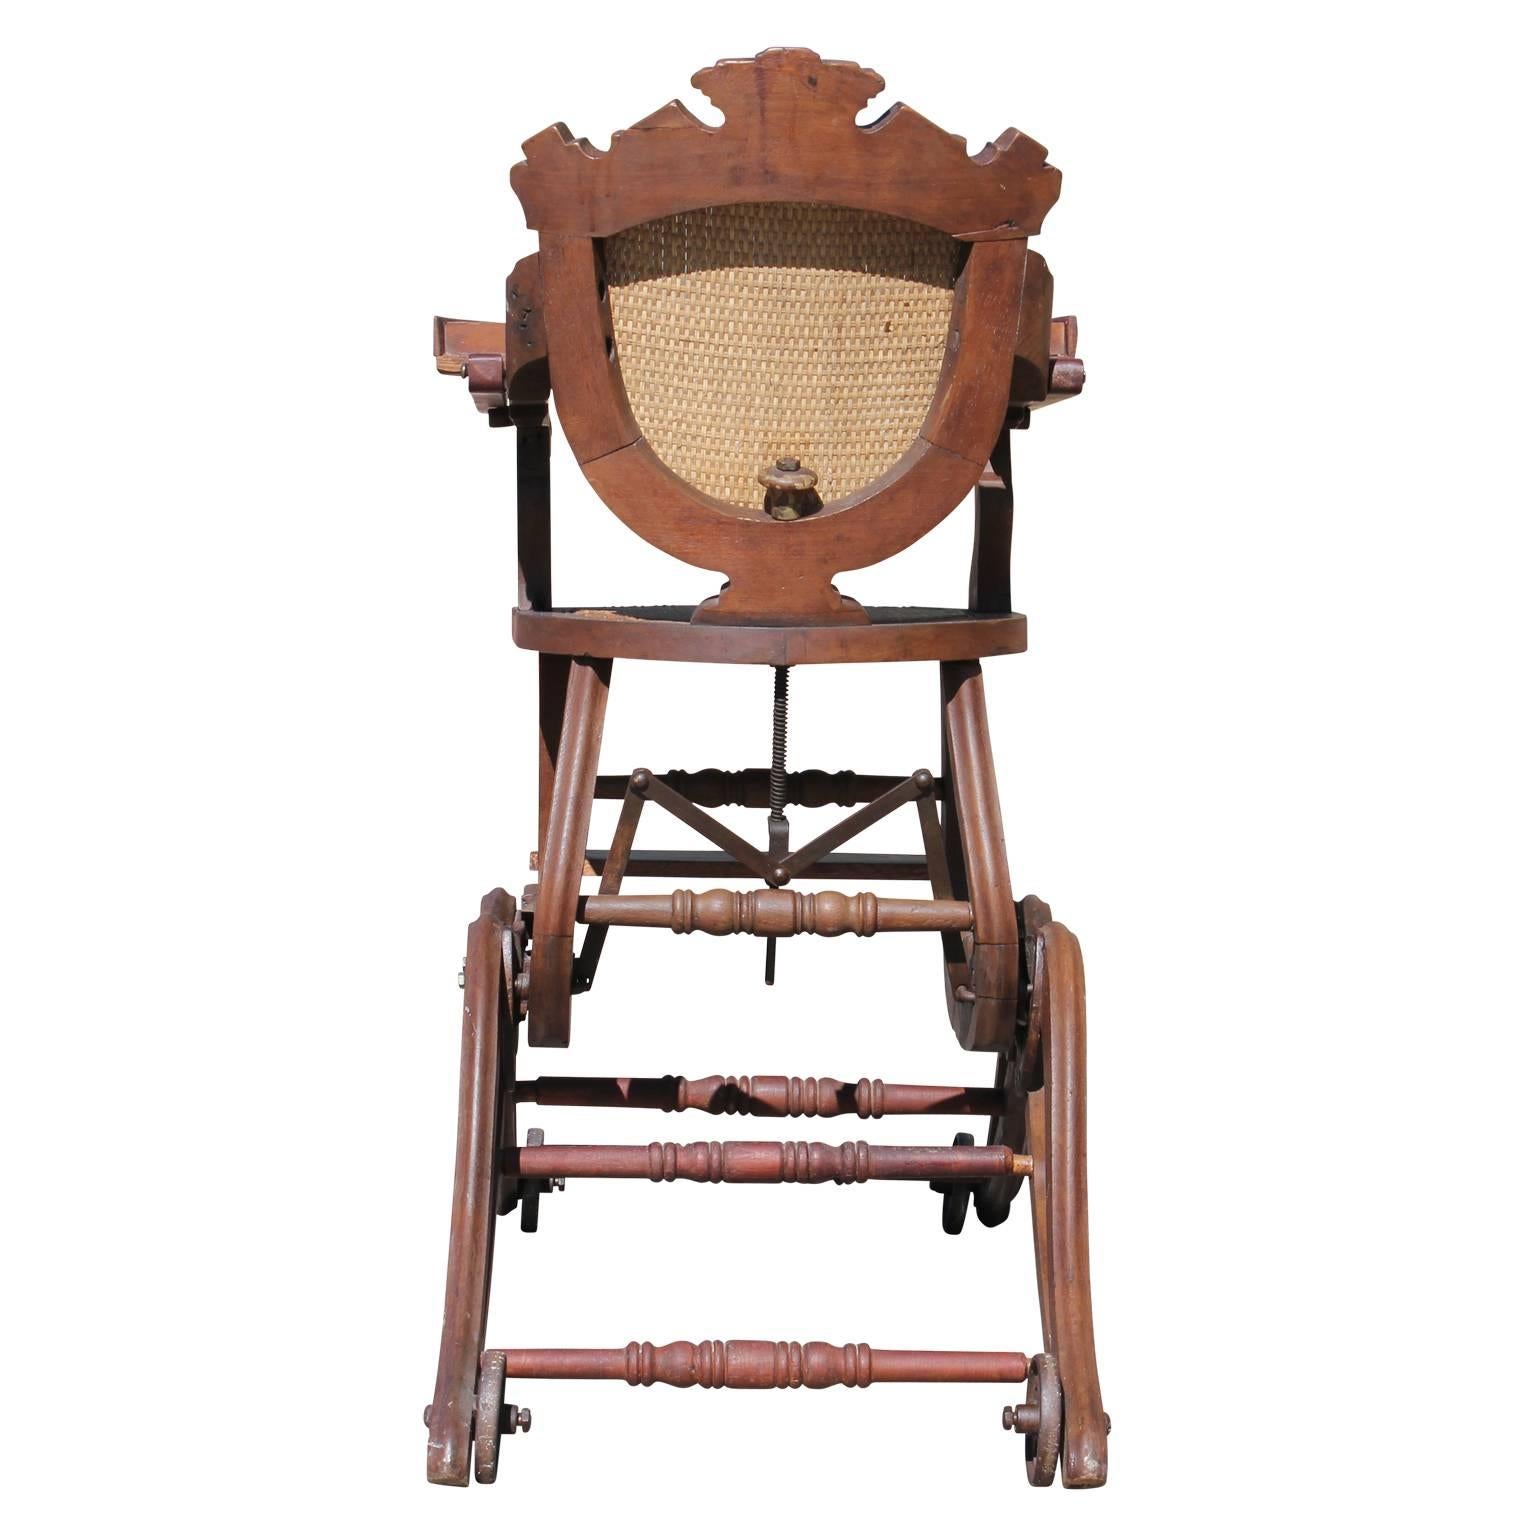 North American 1880s American Victorian Walnut and Cane Metamorphic Highchair on Wheels